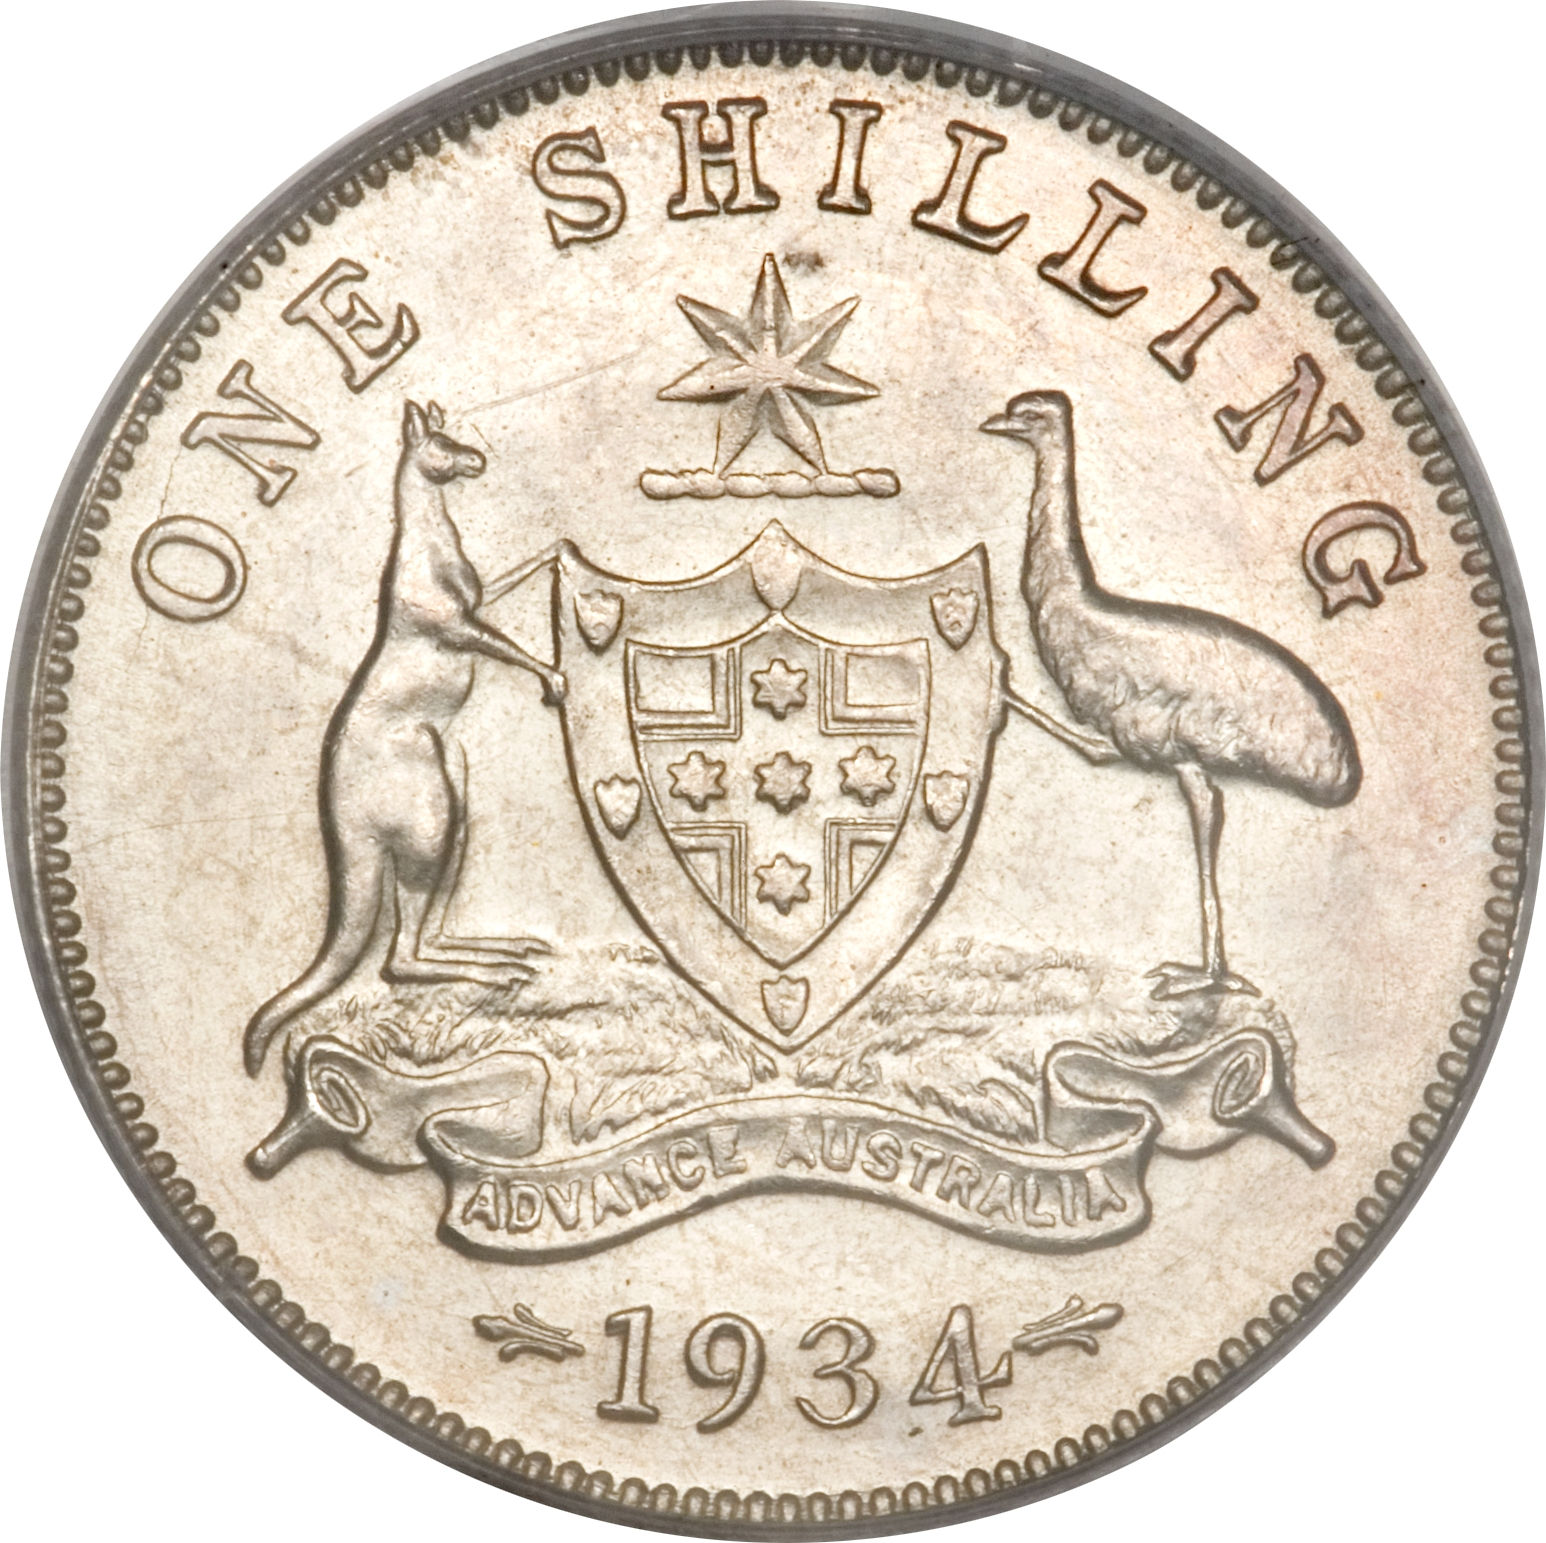 Shilling meaning